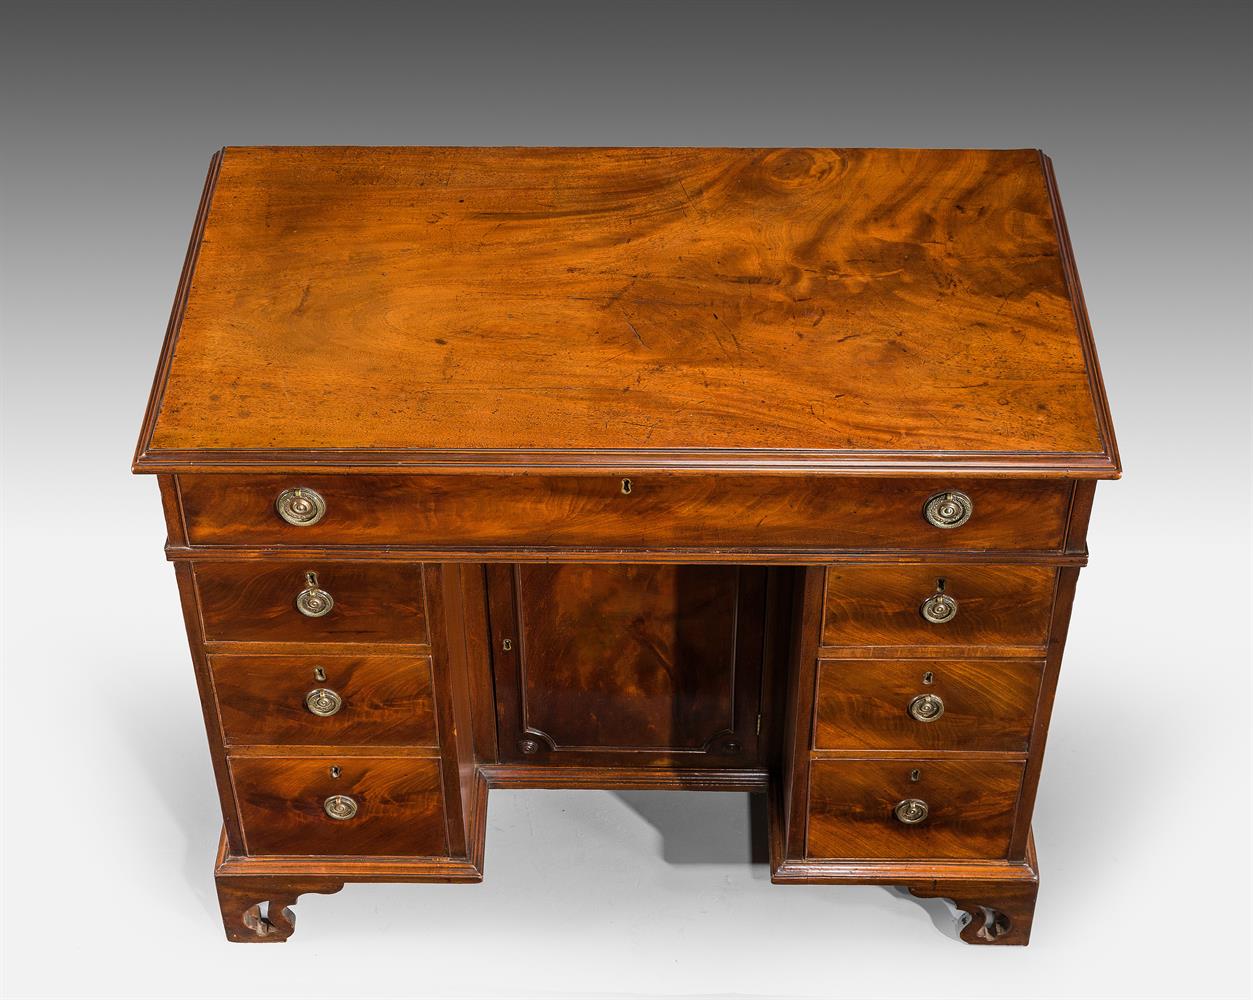 A GEORGE III MAHOGANY KNEEHOLE DESK IN THE MANNER OF THOMAS CHIPPENDALE, CIRCA 1780 - Image 5 of 9